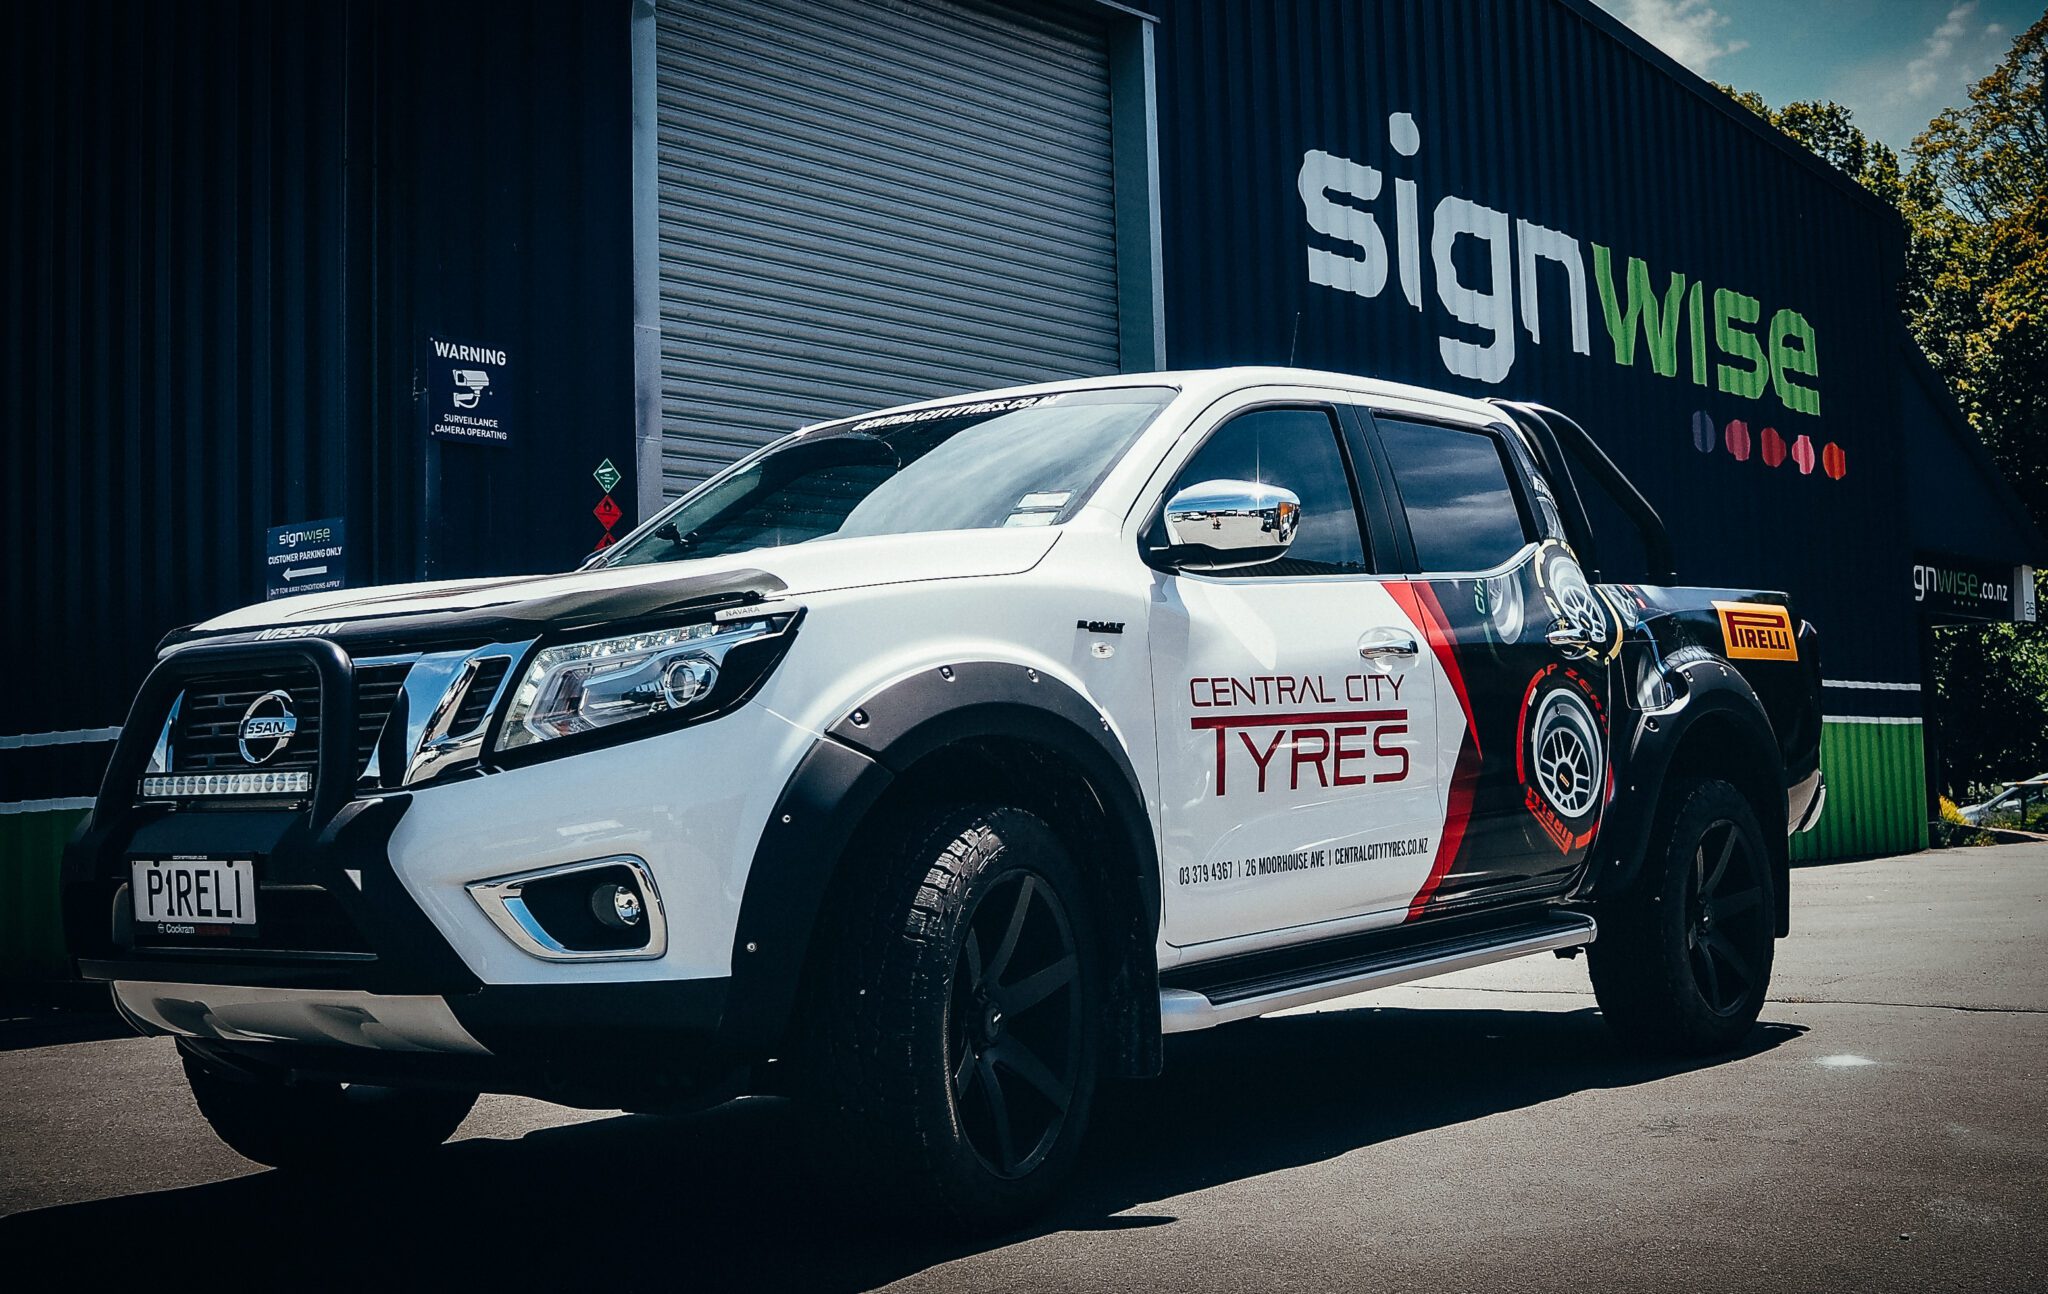 Central City Tyres Ute Graphics